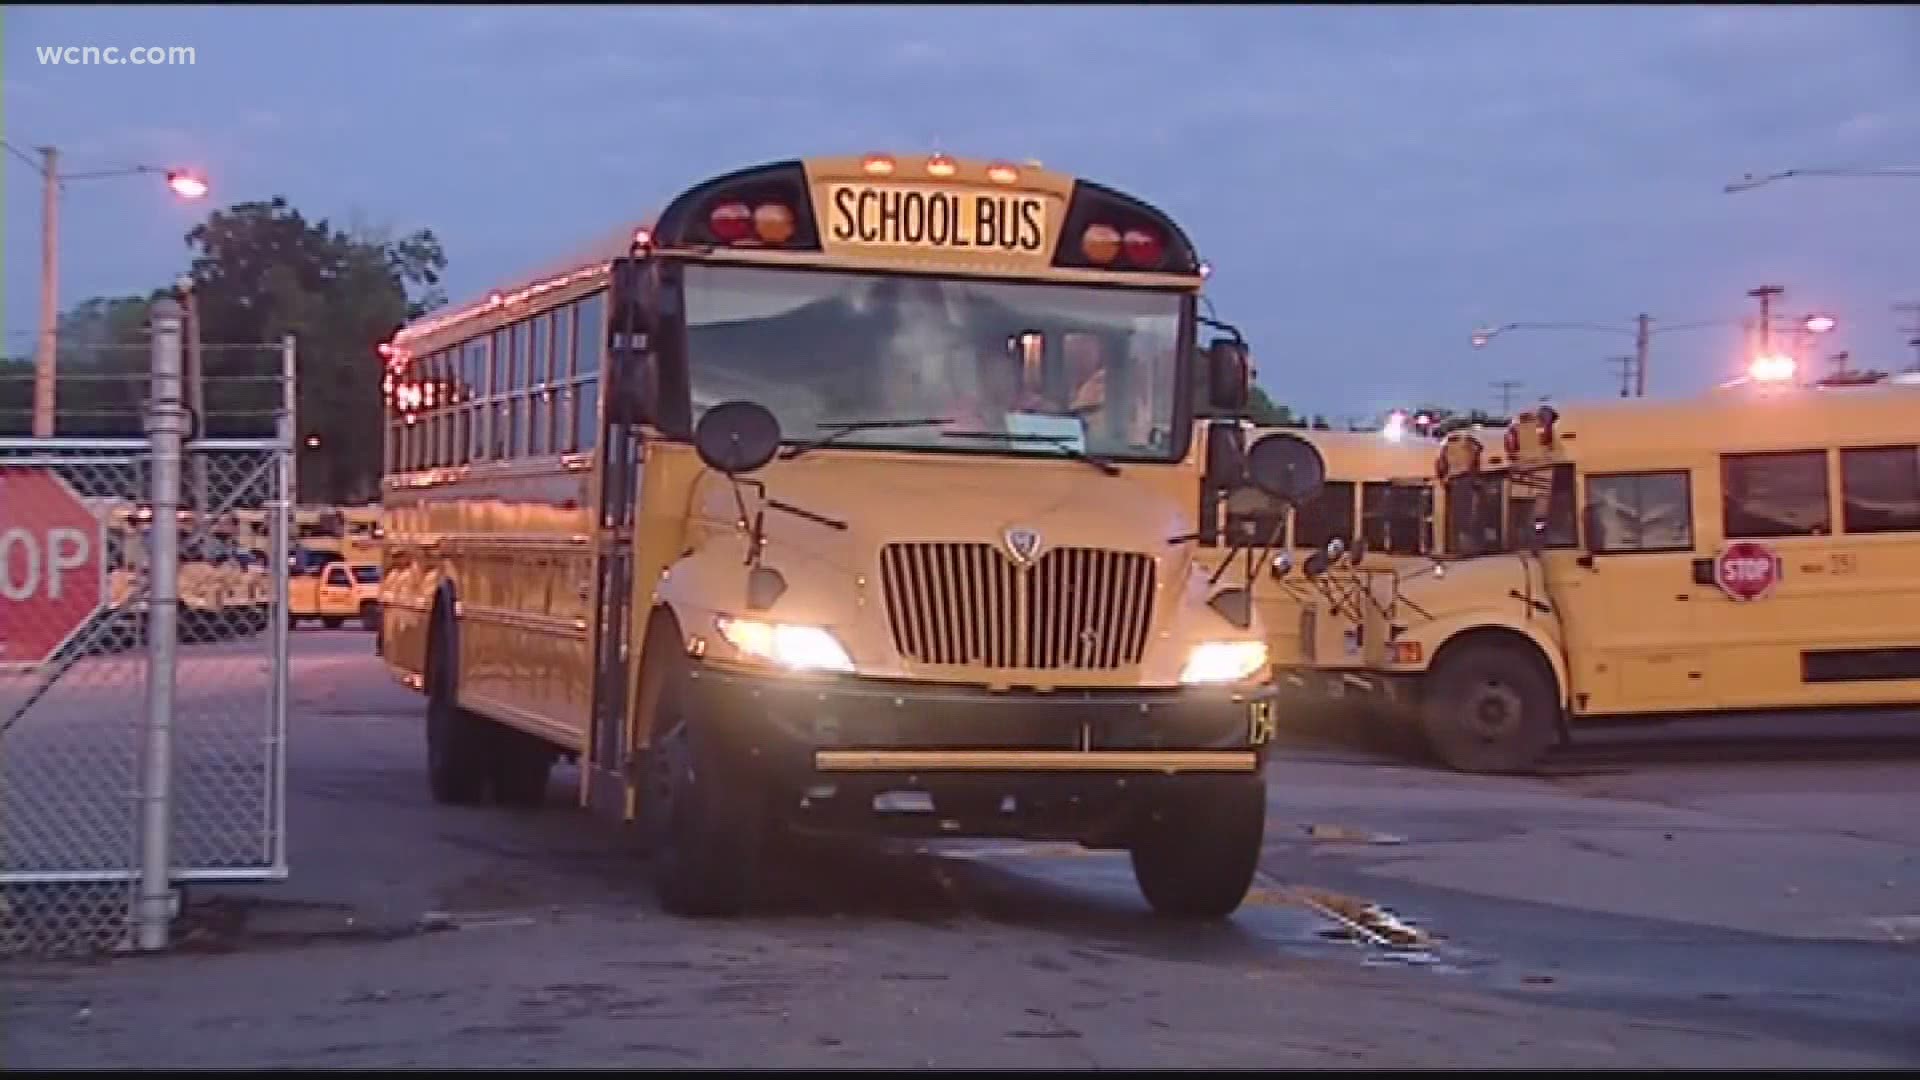 122 bus drivers have taken leave until the end of the year. The shortage is causing CMS leaders to pump the breaks.